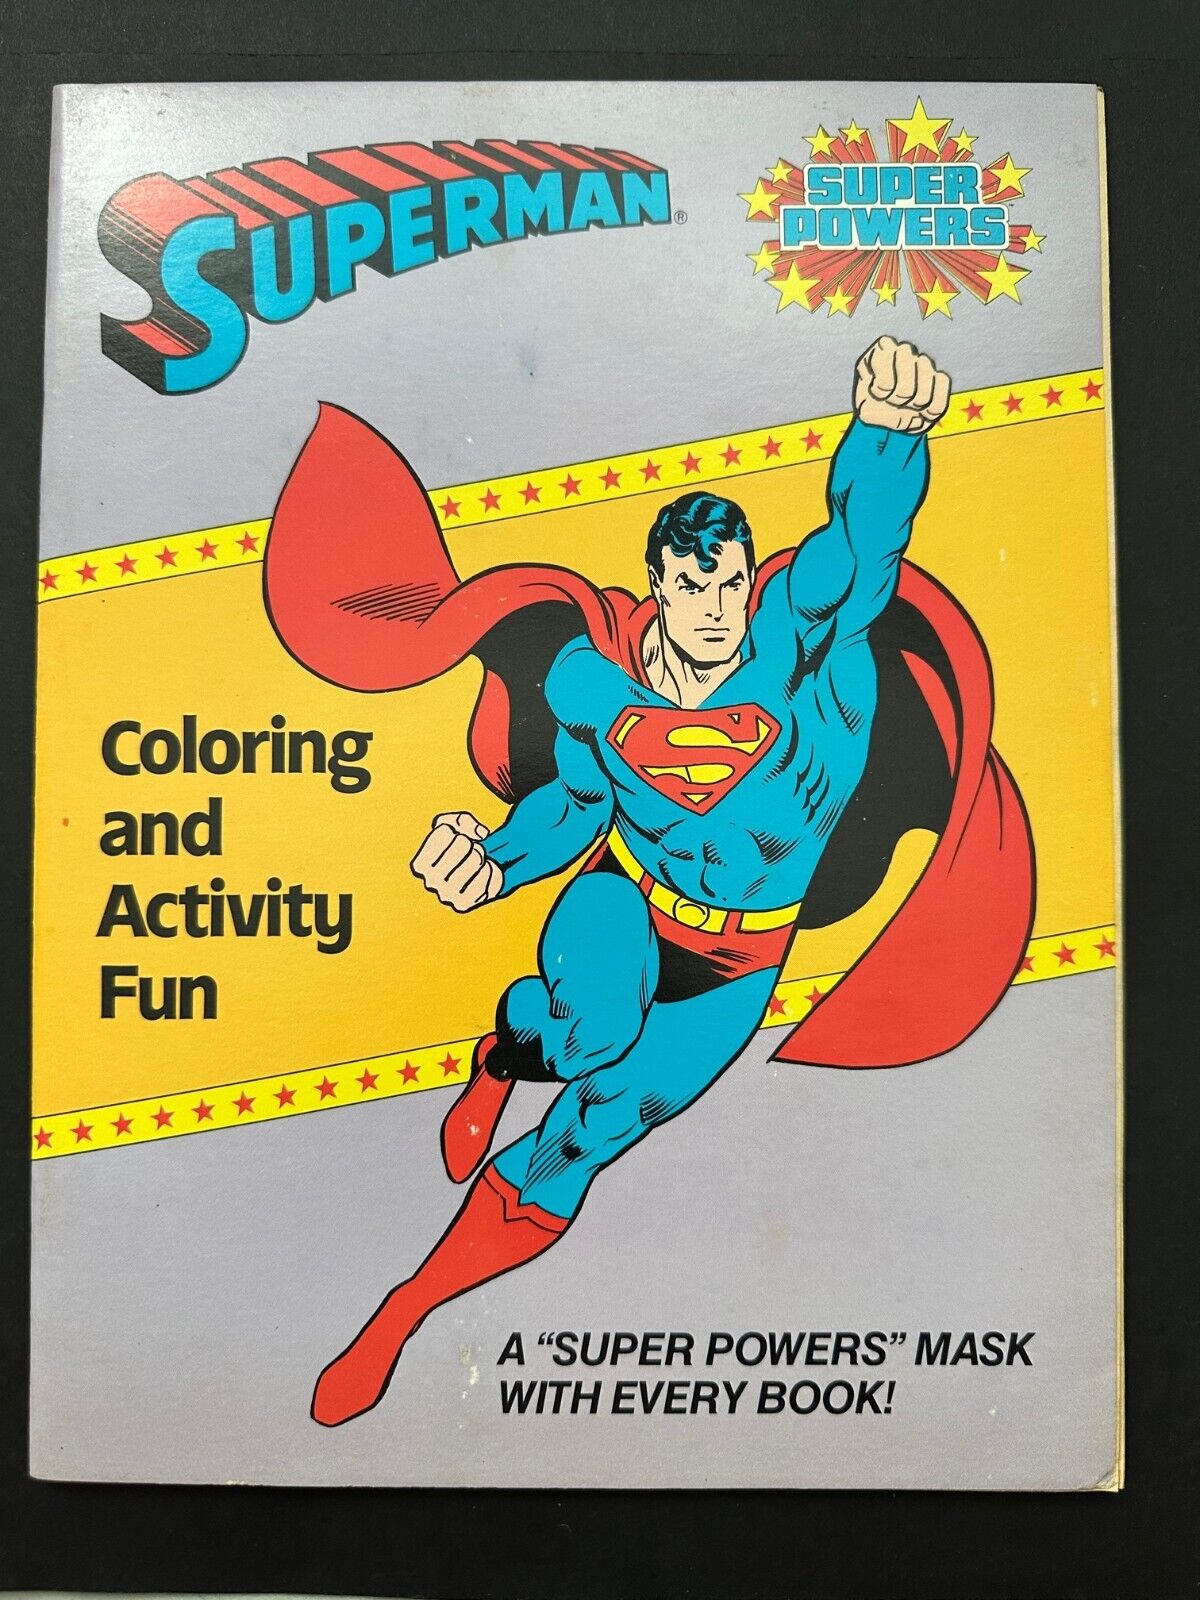 Vintage Superman Super Powers Coloring and Activity Book 1984 Unused RARE